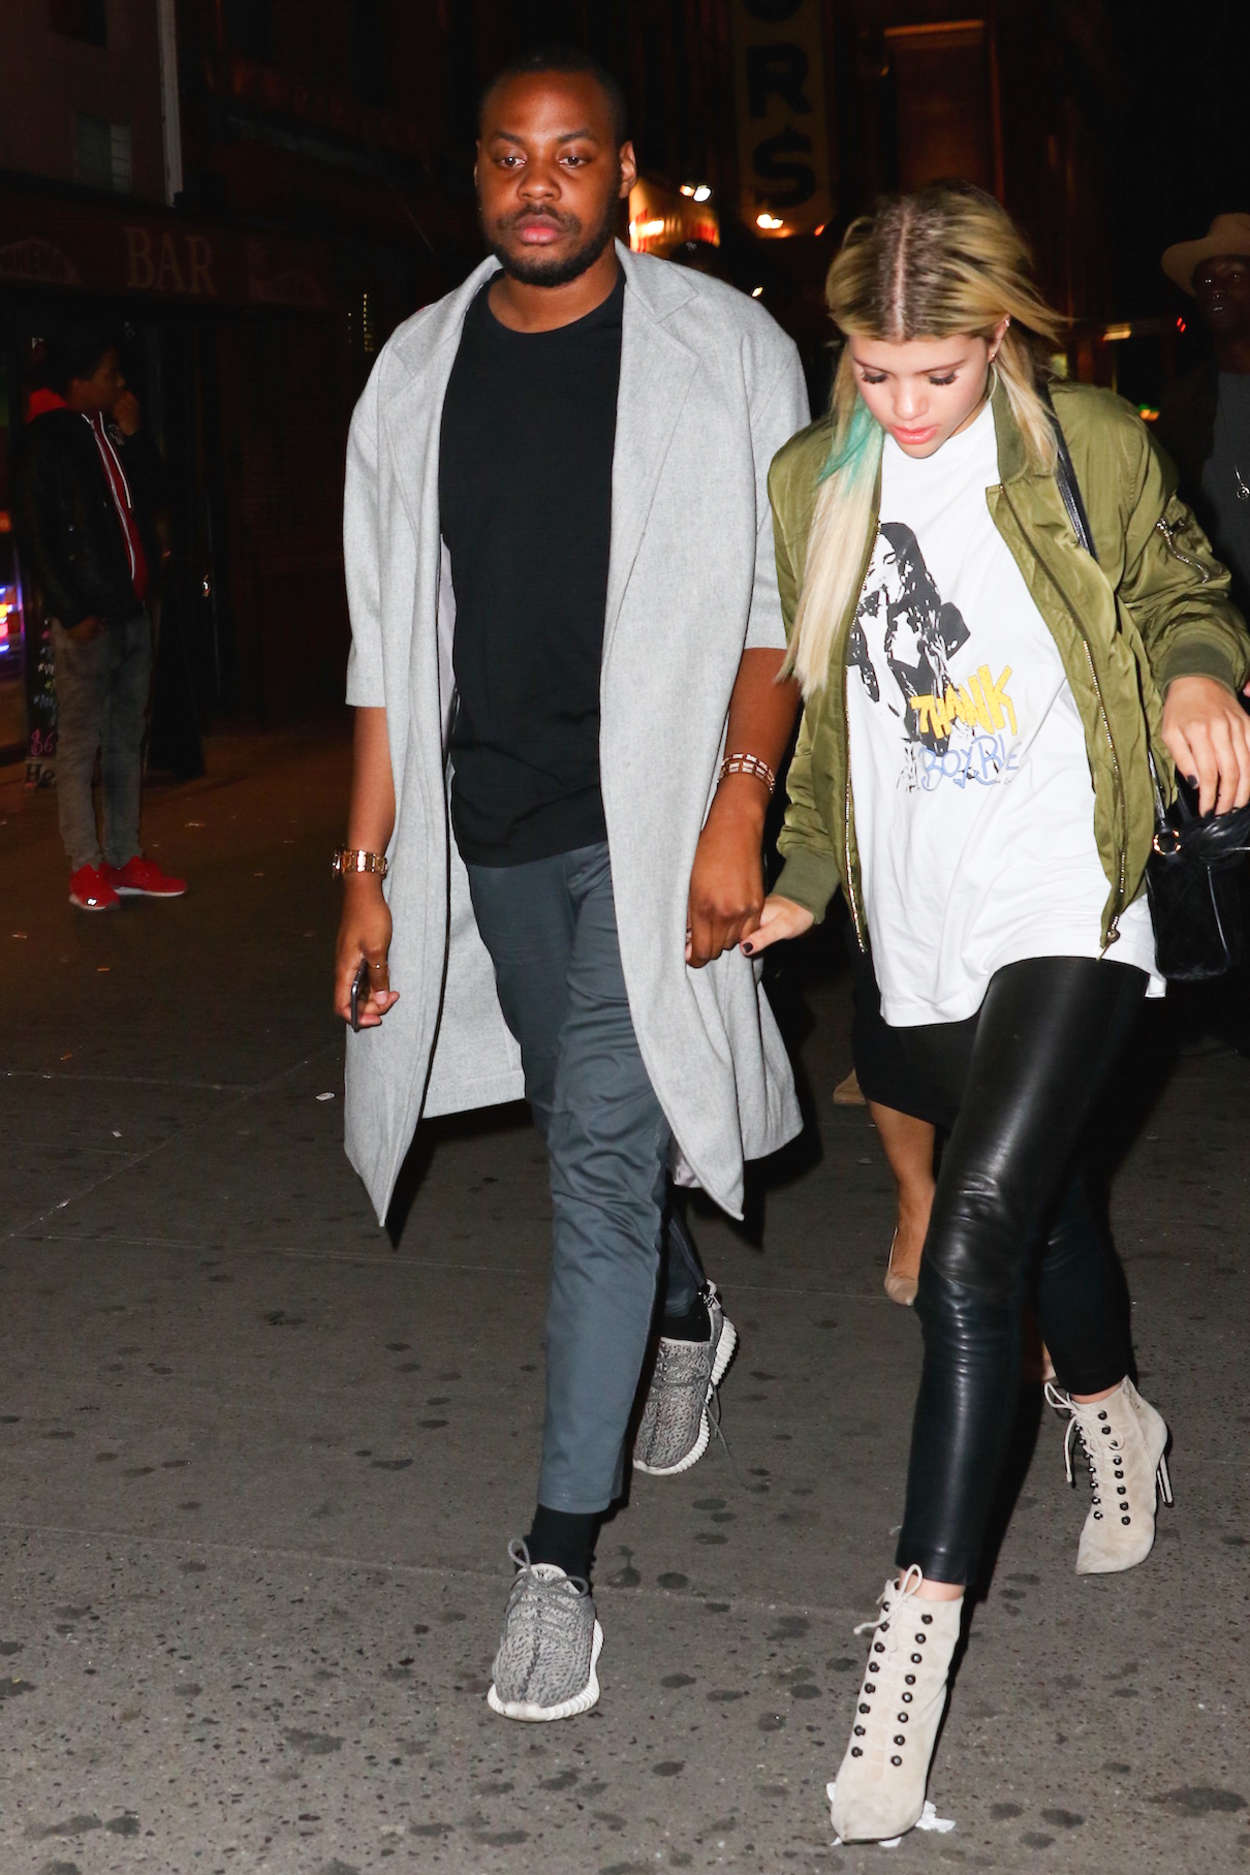 Sofia Richie arriving at Up & Down